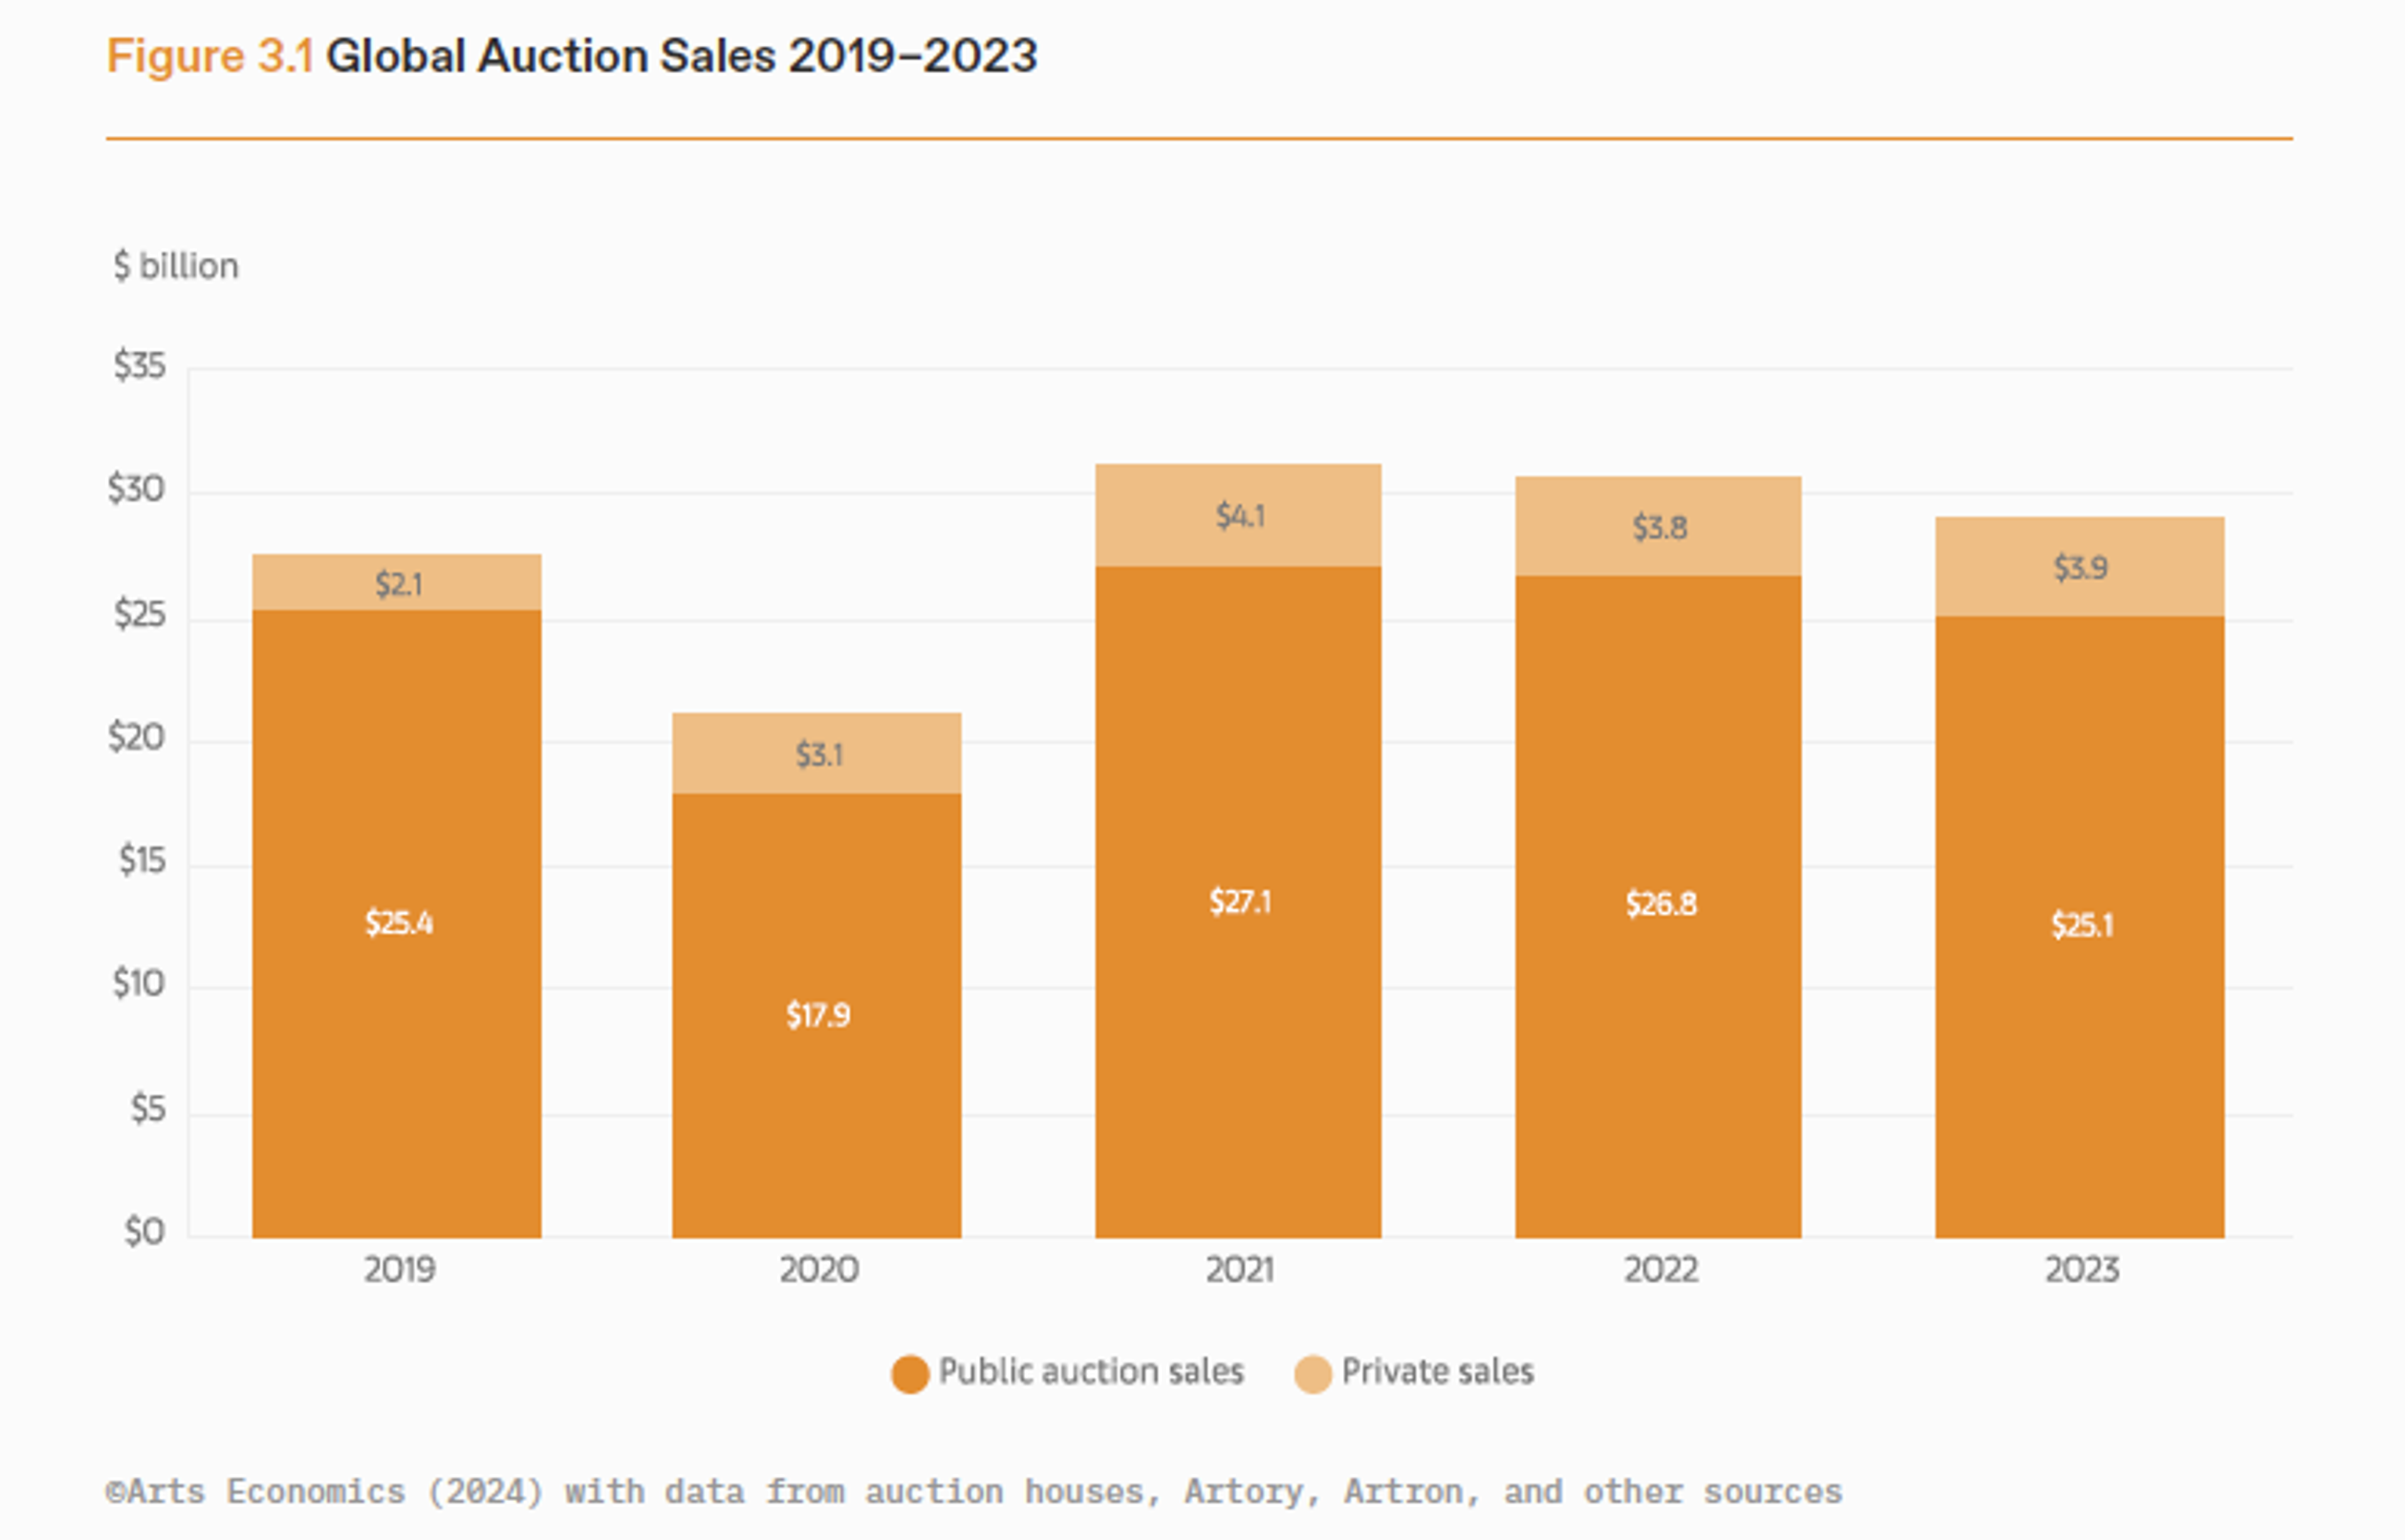 Double bar graph of global auction sales and private sales from 2019 to 2023. 